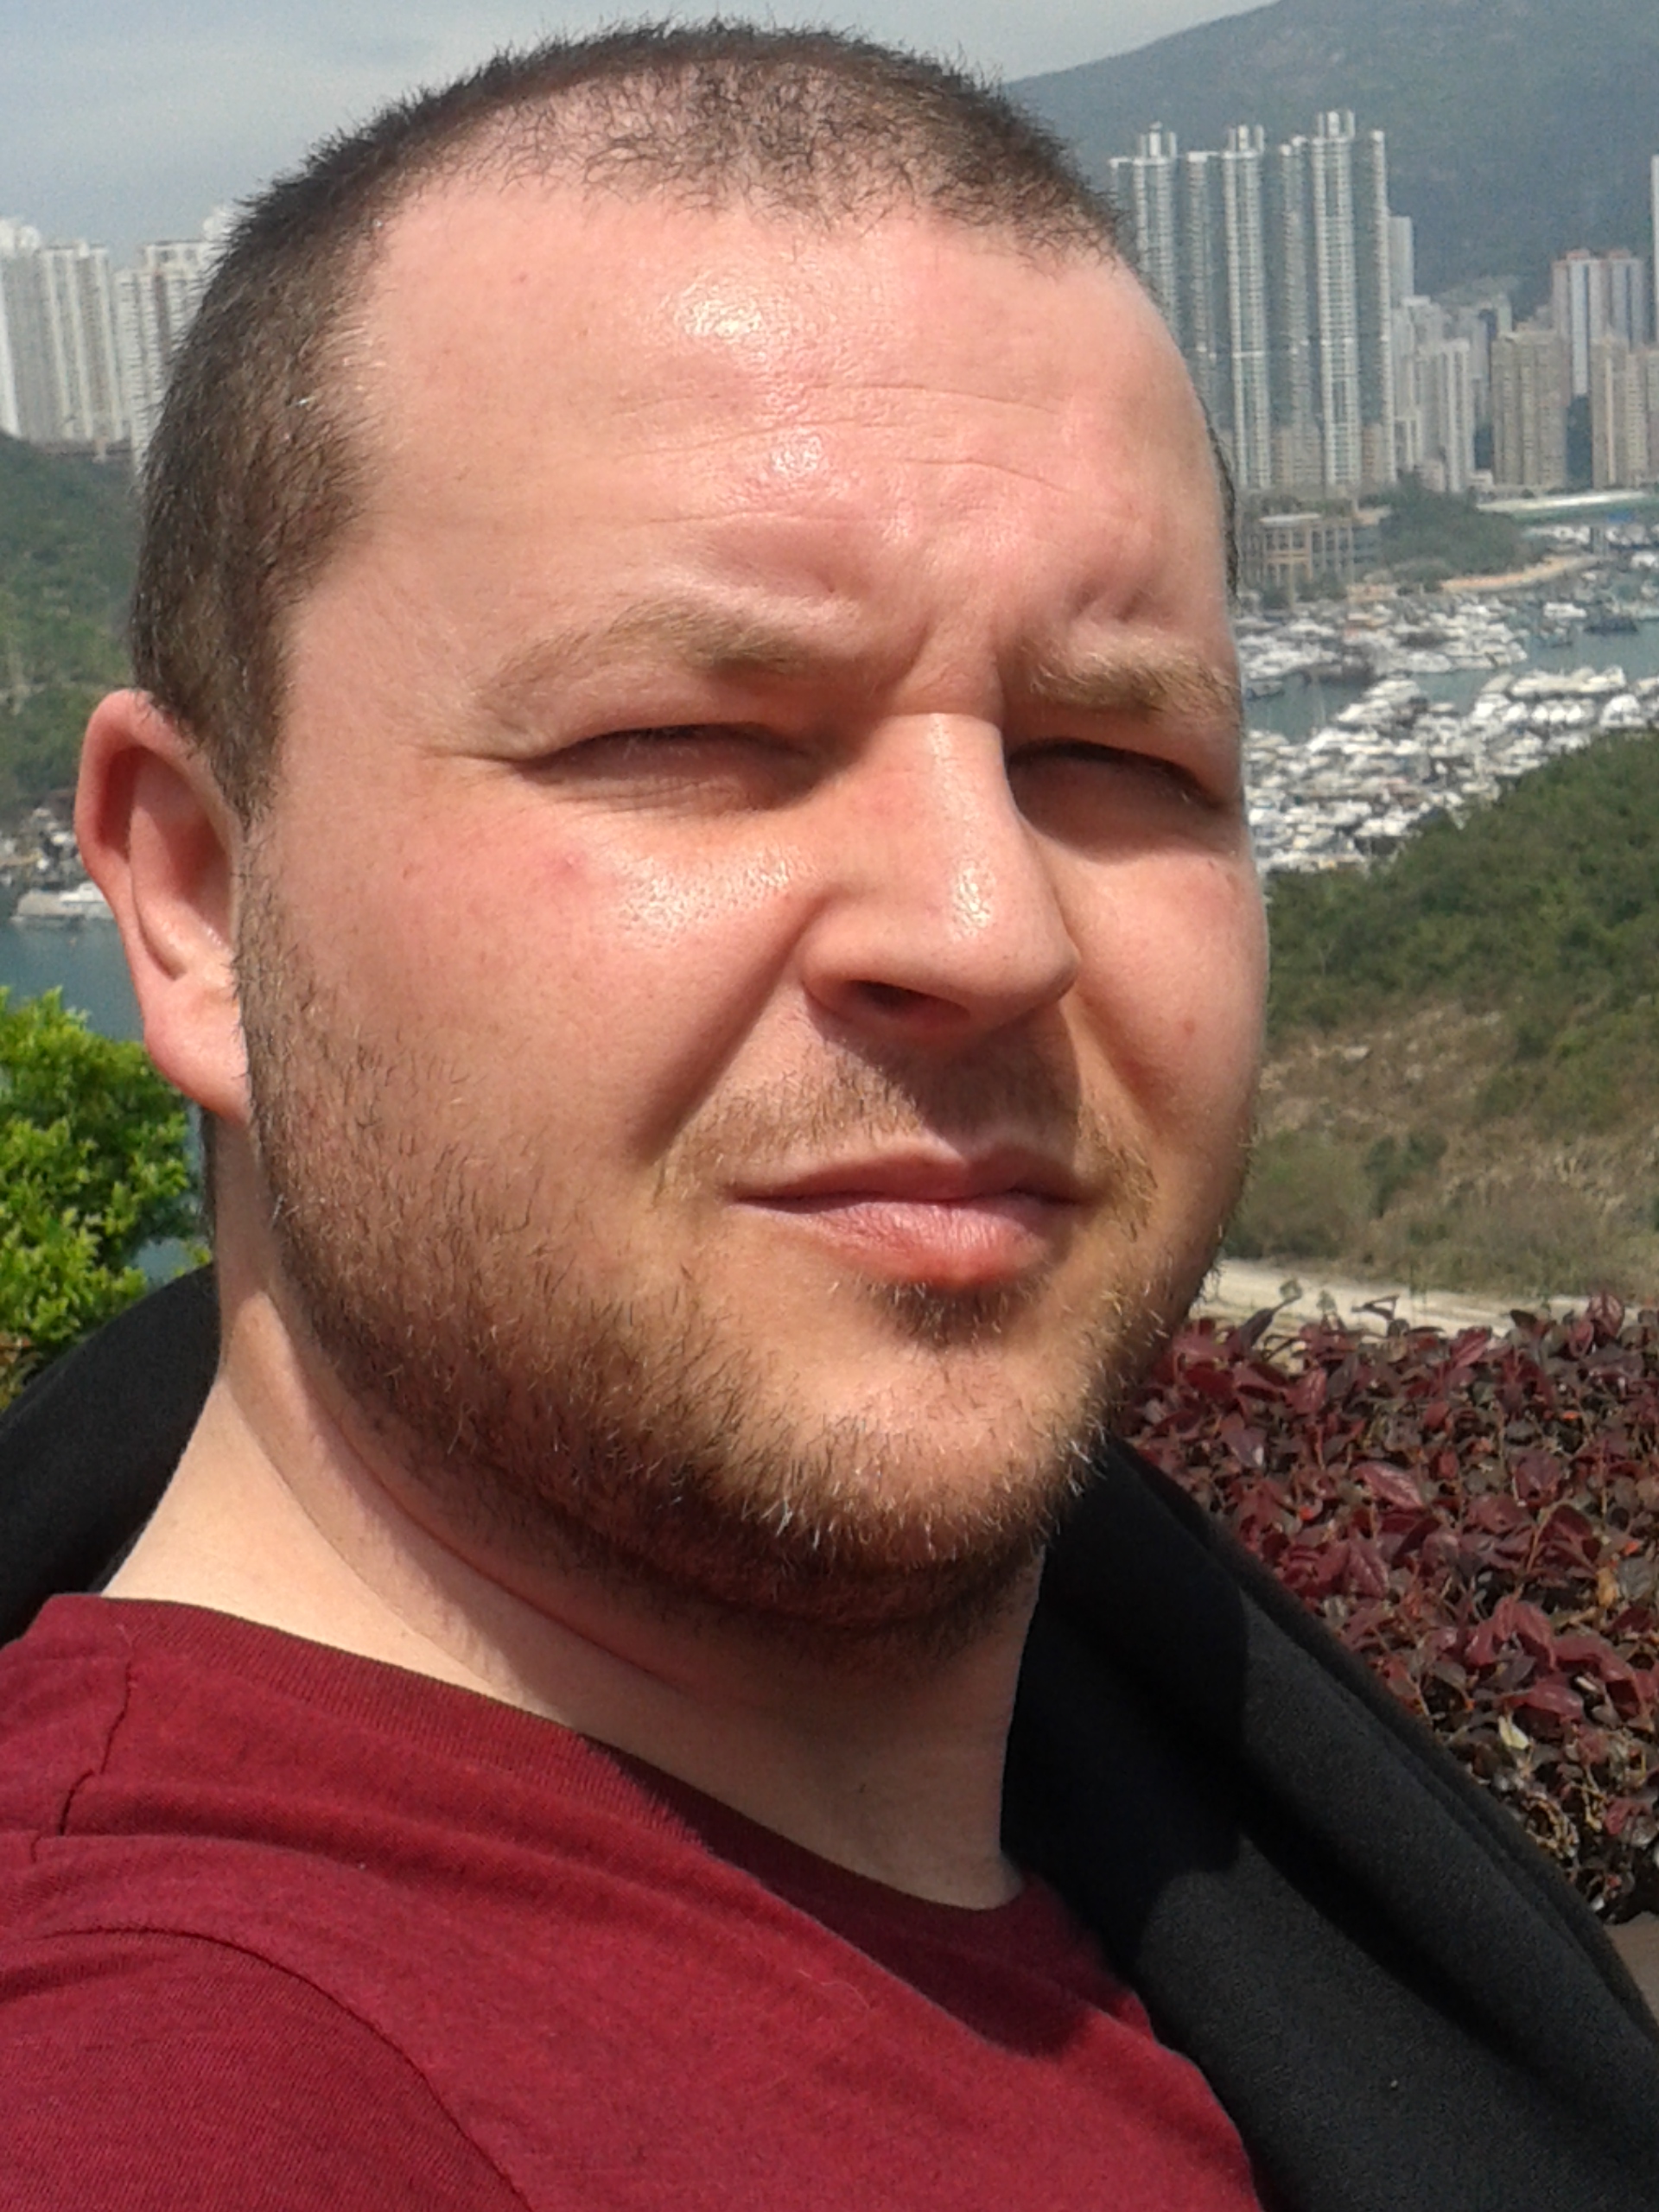 In the South east of Hong Kong on a very hot day in March?